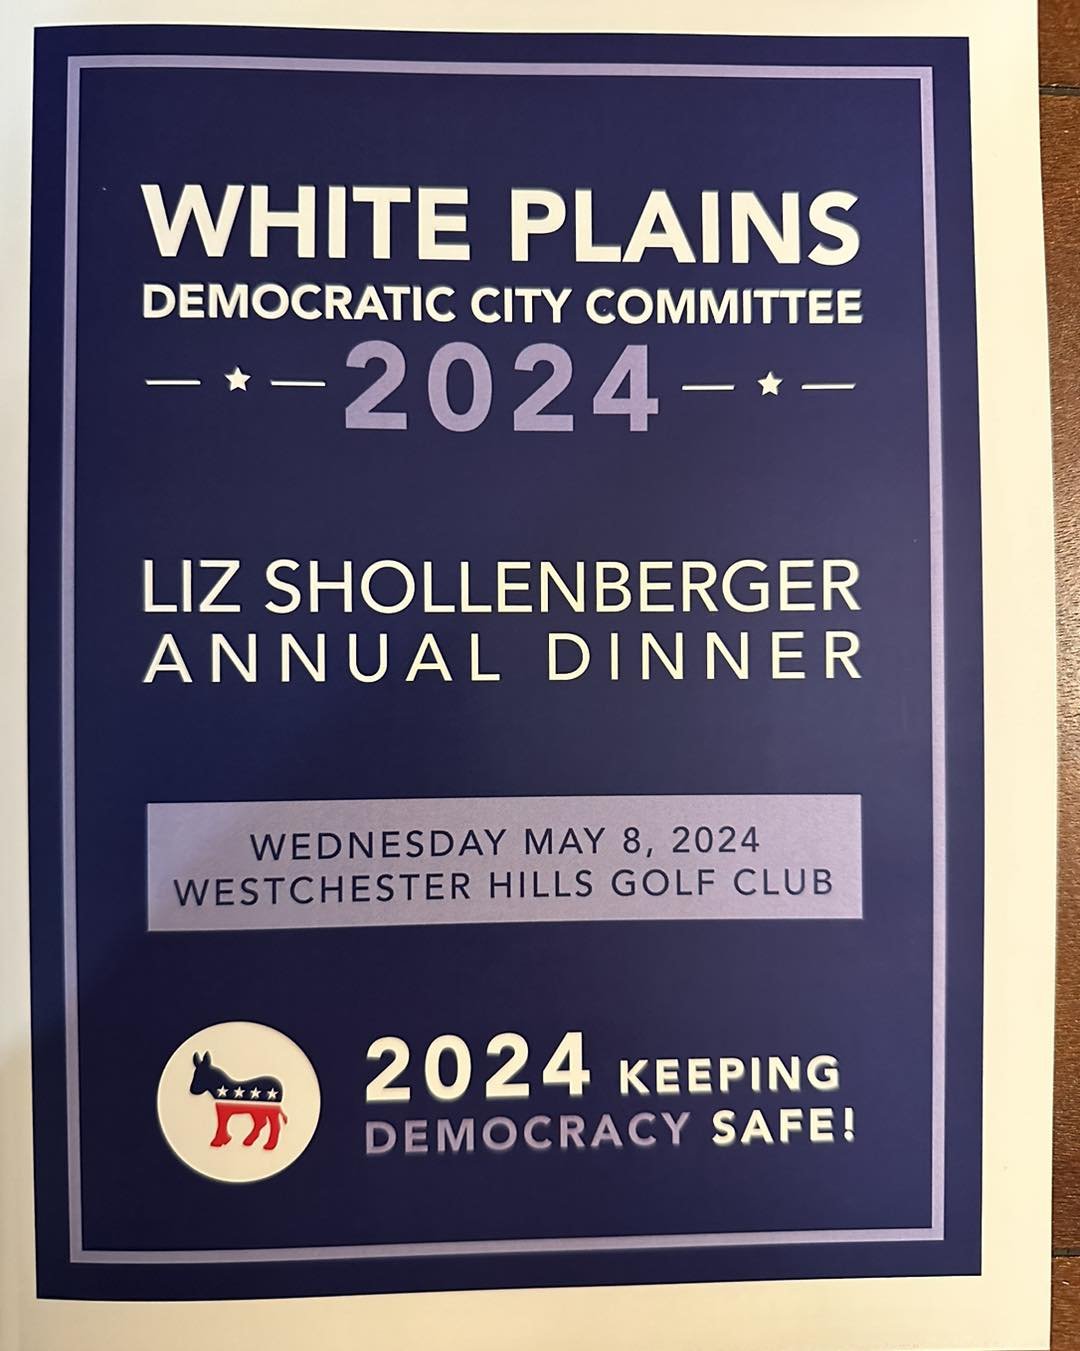 Thank you White Plains Democrats for your immense support and commitment!!! 🙏🤲